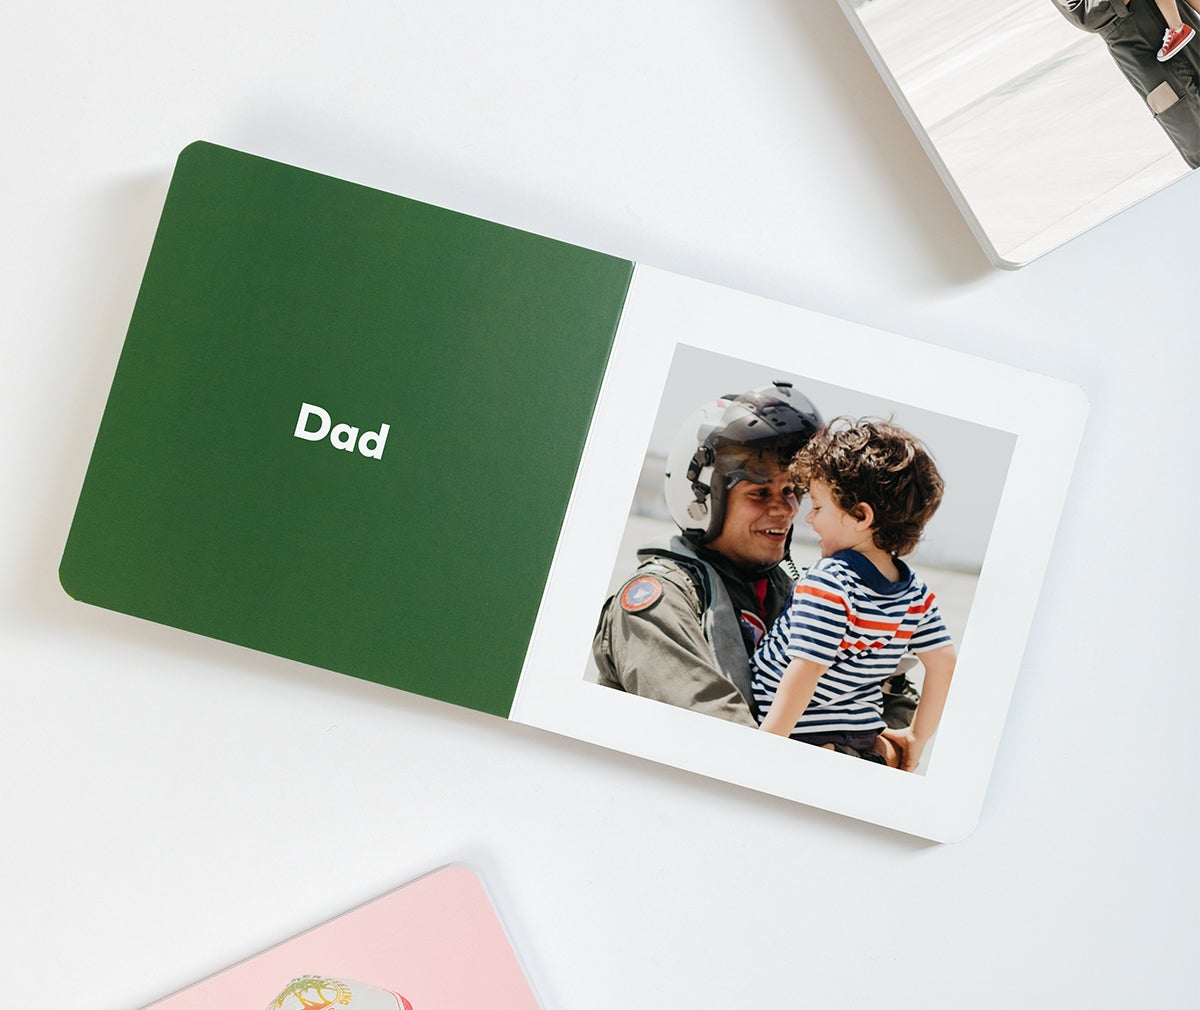 Baby Board Book opened to photo of dad